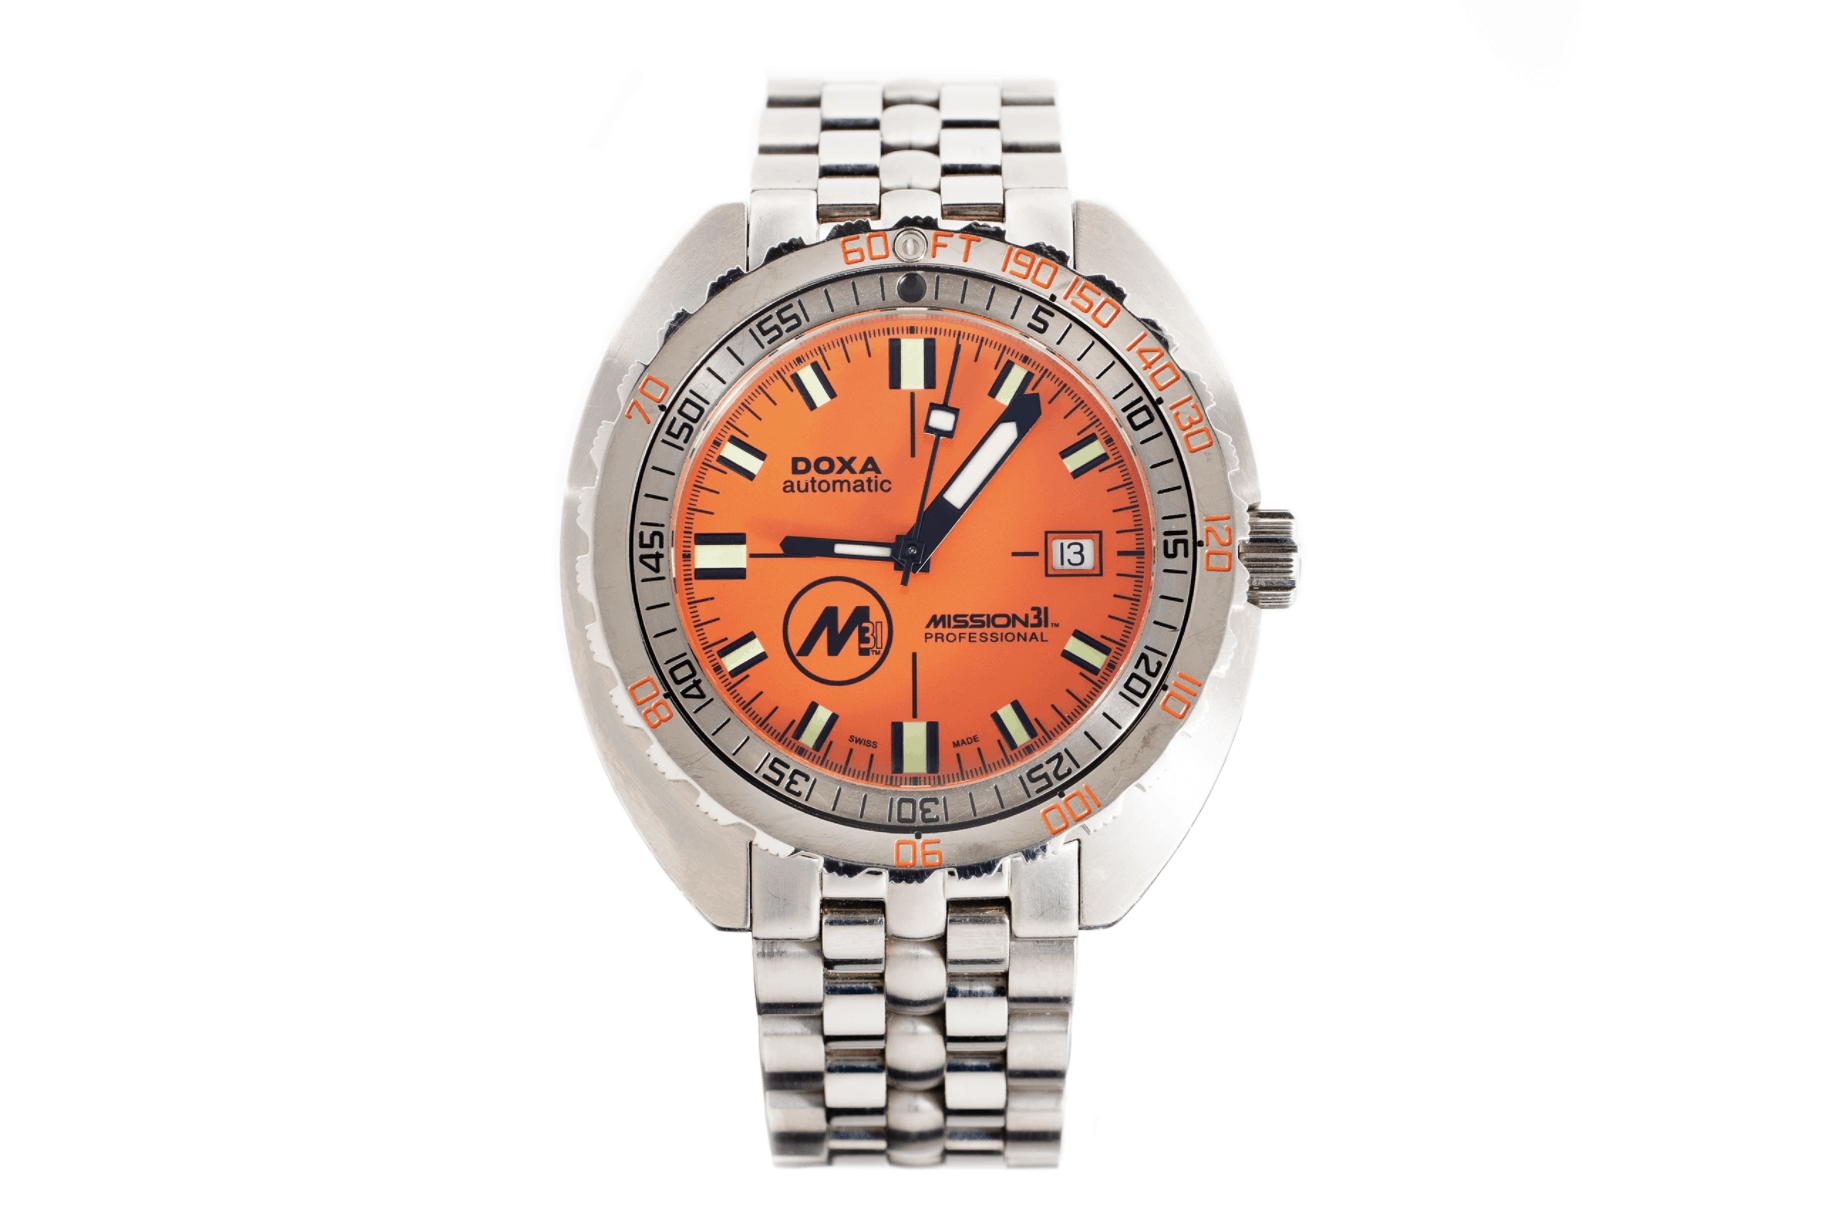 Watches, Stories & Gear: A DOXA For A Good Cause, A Secret Soviet Naval Craft, and More